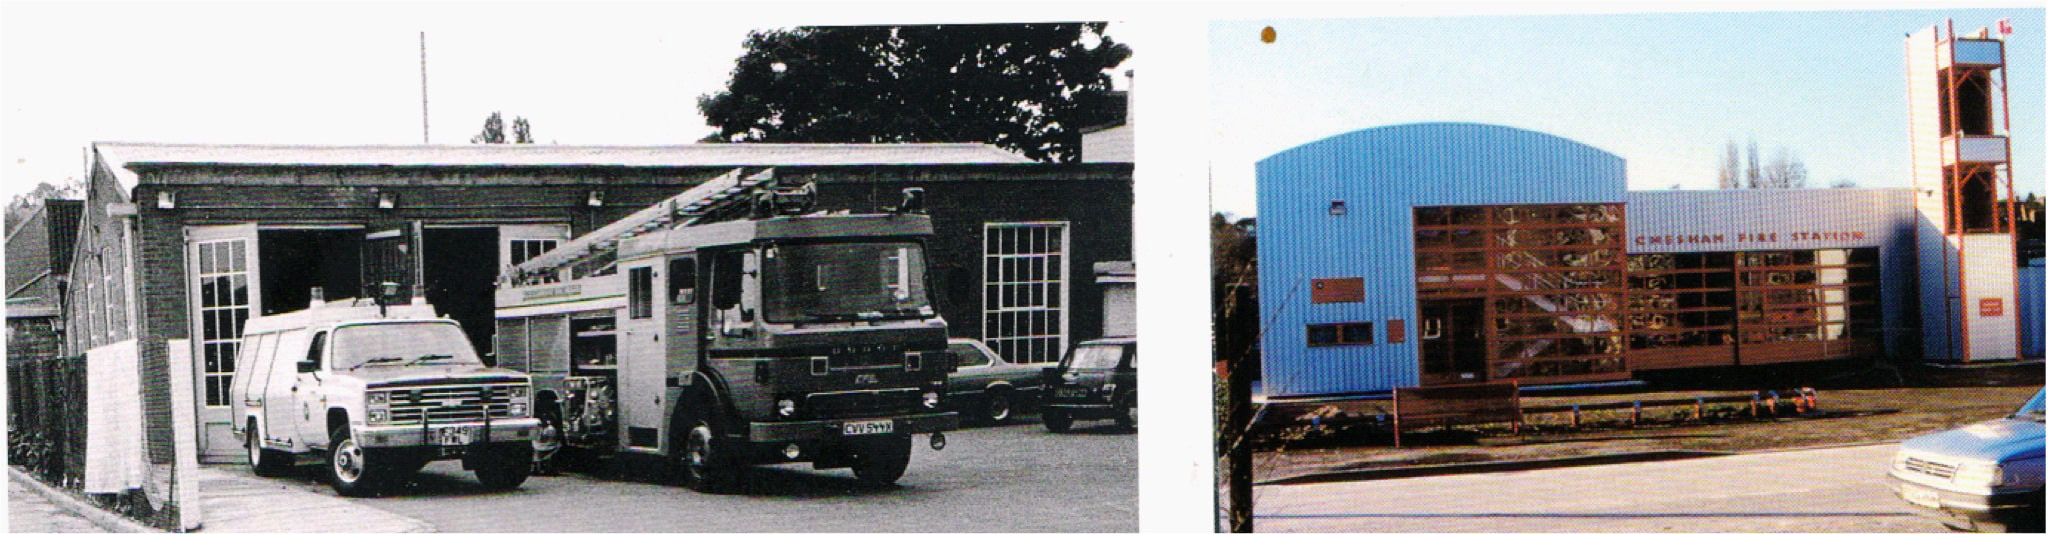 A photo of Bellingdon Road fire station original and new buildings